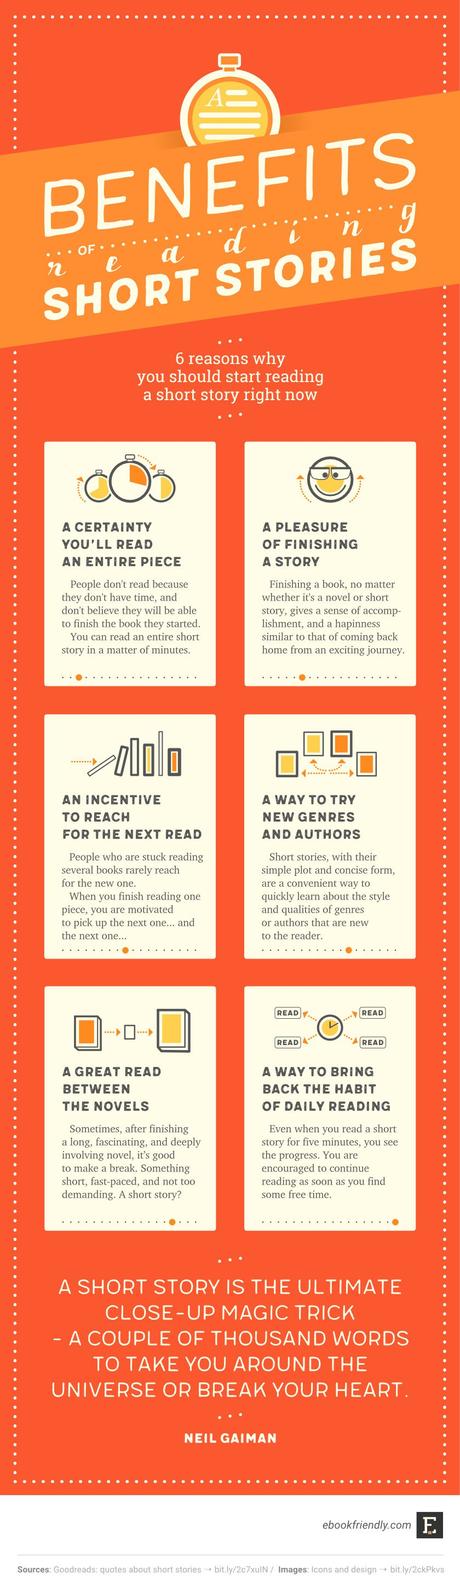 Benefits of reading short stories (infographic) | Ebook Friendly